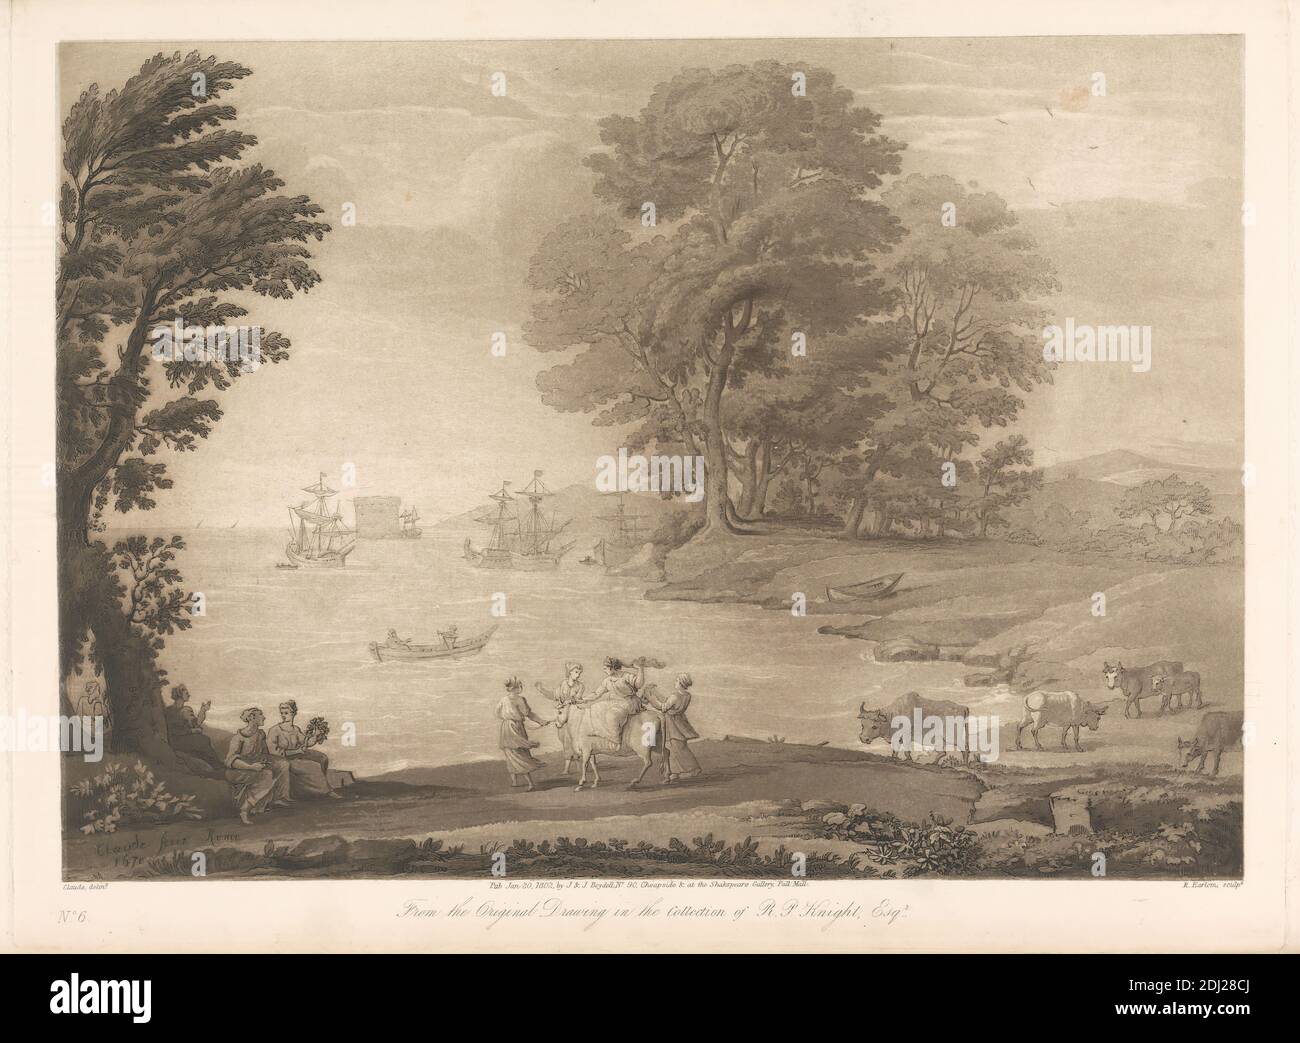 https://c8.alamy.com/comp/2DJ28CJ/a-landscape-with-the-story-of-europa-print-made-by-richard-earlom-17431822-british-after-claude-lorrain-16001682-french-published-by-john-boydell-17201804-british-published-by-josiah-boydell-17521817-british-1802-aquatint-and-etching-in-brown-ink-on-moderately-thick-slightly-textured-cream-wove-paper-sheet-10-1516-x-16-58-inches-278-x-422-cm-plate-10-78-x-14-12-inches-276-x-369-cm-and-image-9-916-x-13-716-inches-243-x-342-cm-abduction-assistants-bulls-cattle-chiton-costume-cows-flowers-plants-god-grazing-greek-mythology-island-jupiter-2DJ28CJ.jpg